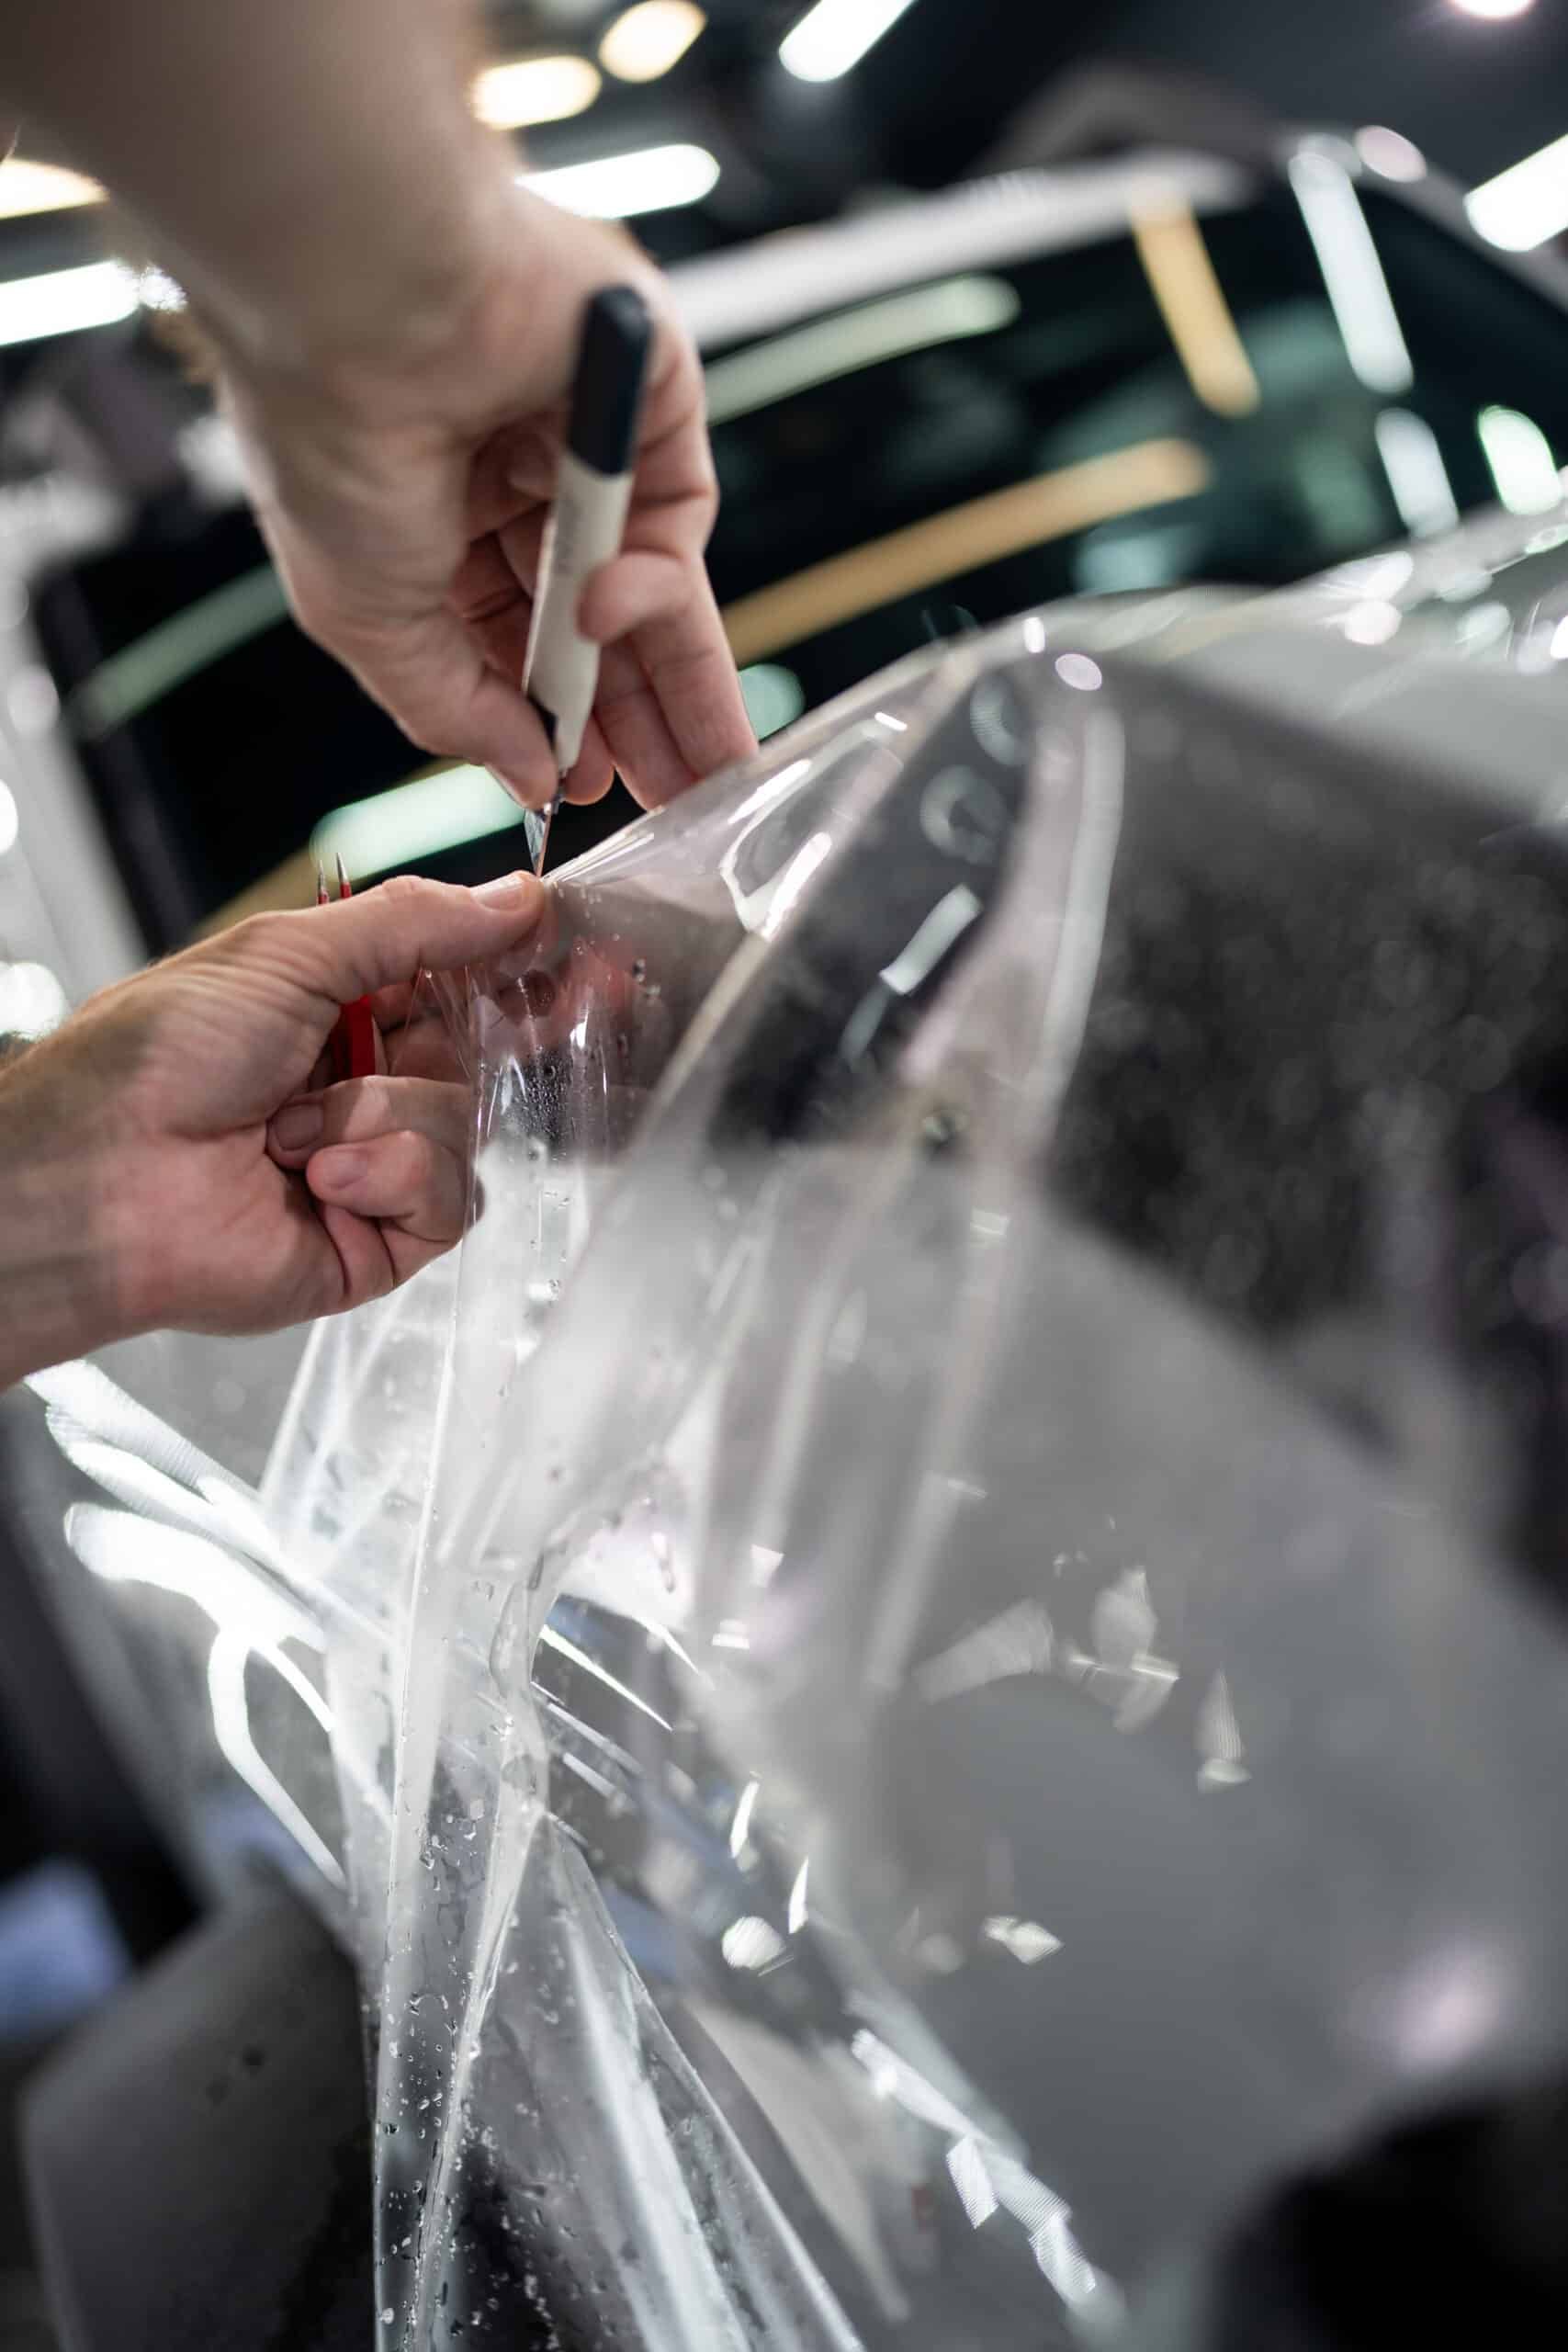 A person is applying plastic wrap to a car with a marker.